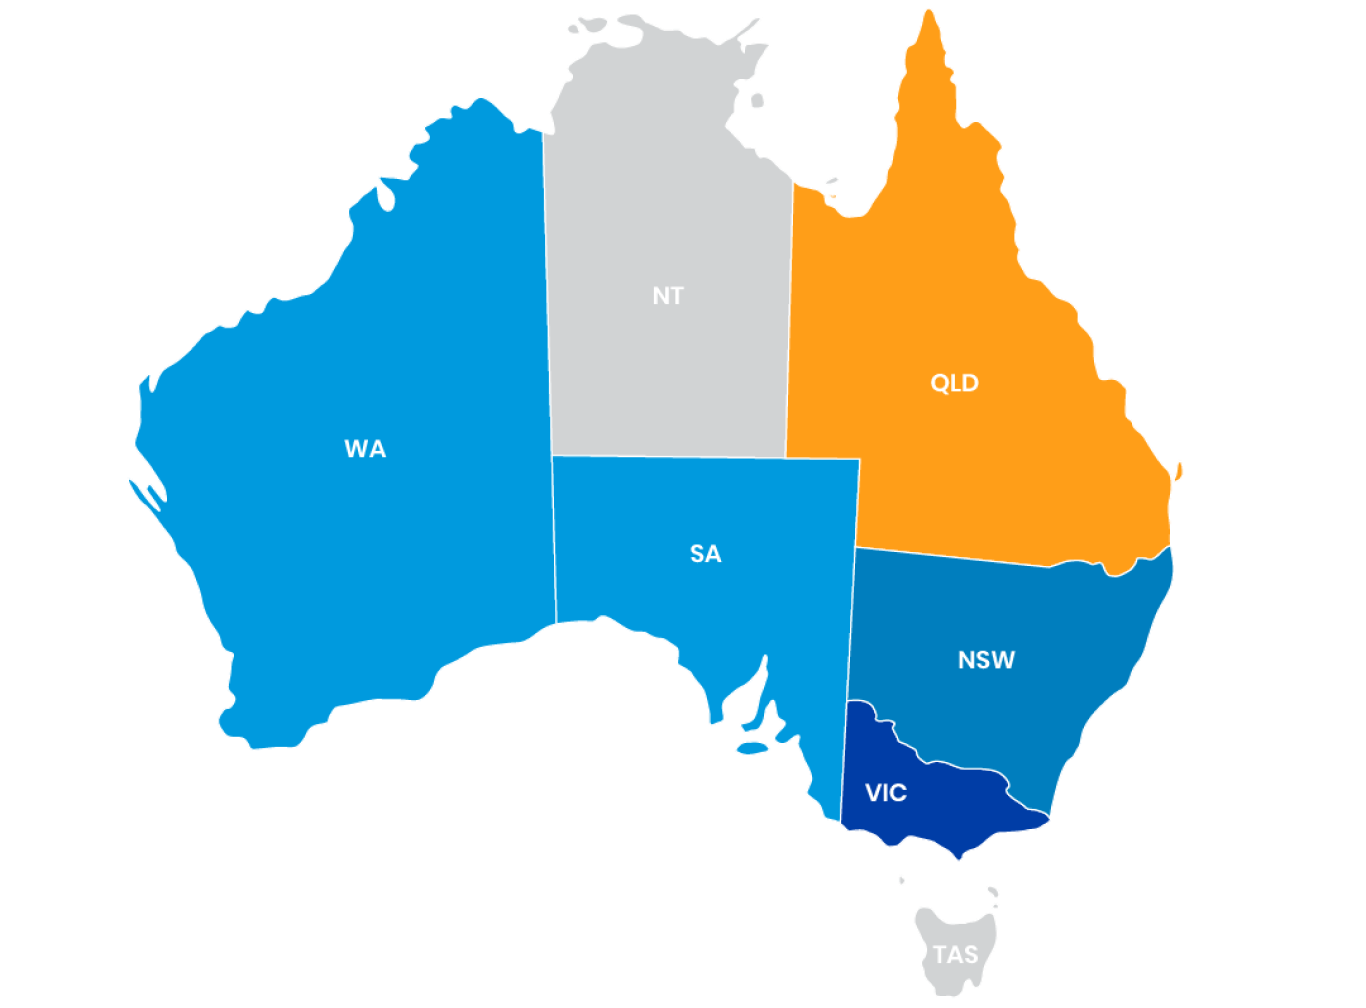 A map of australia with the states highlighted in blue and orange.